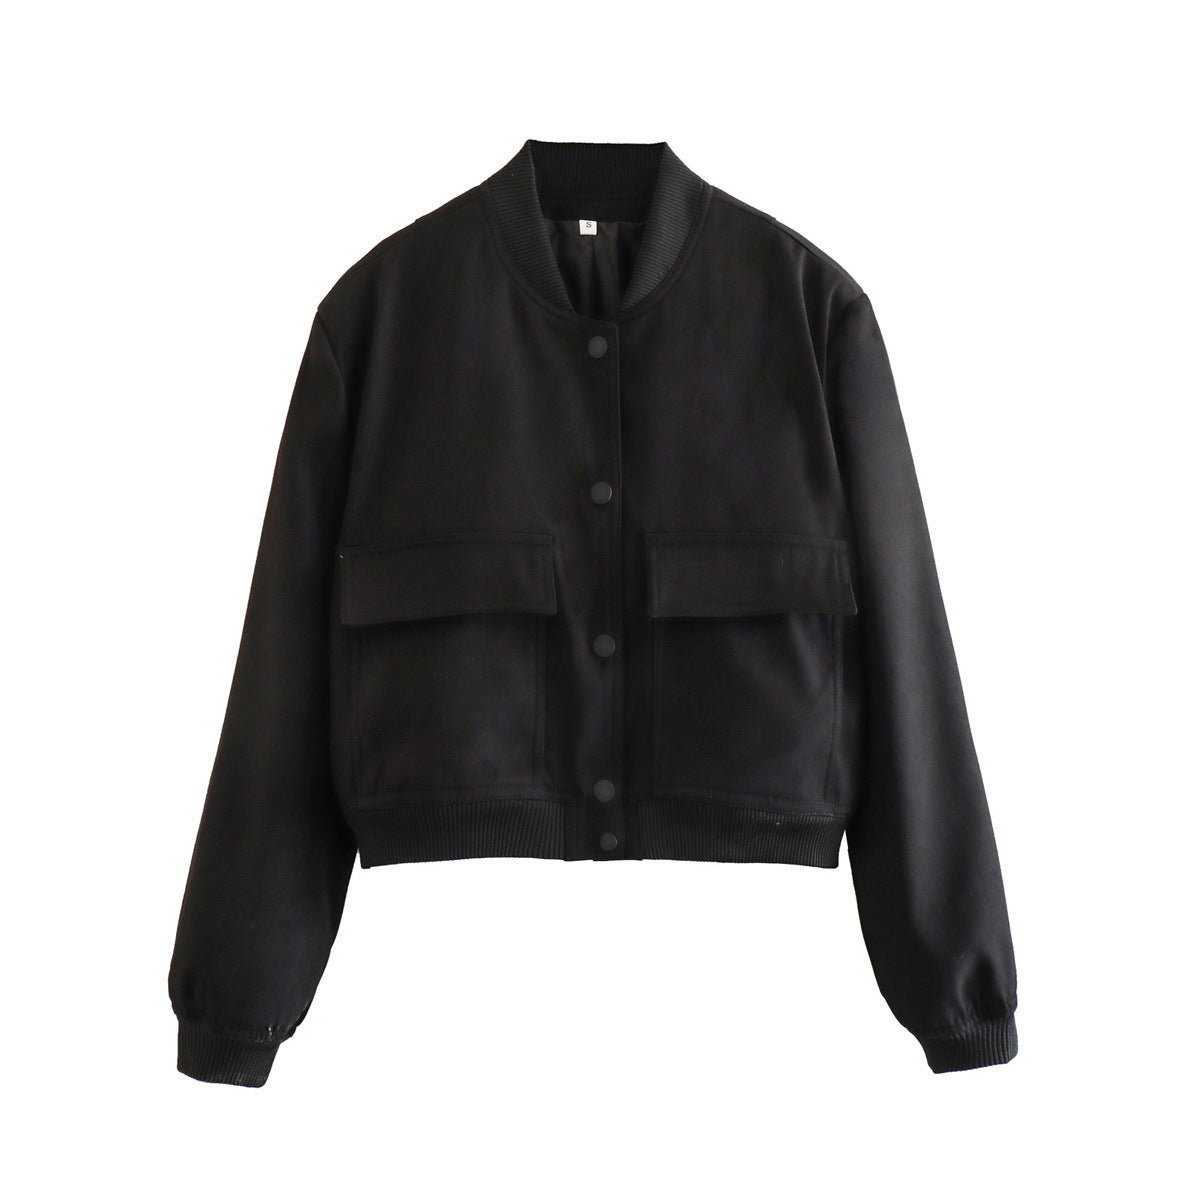 Moto-Chic Bomber Jacket - Try Modest Limited 